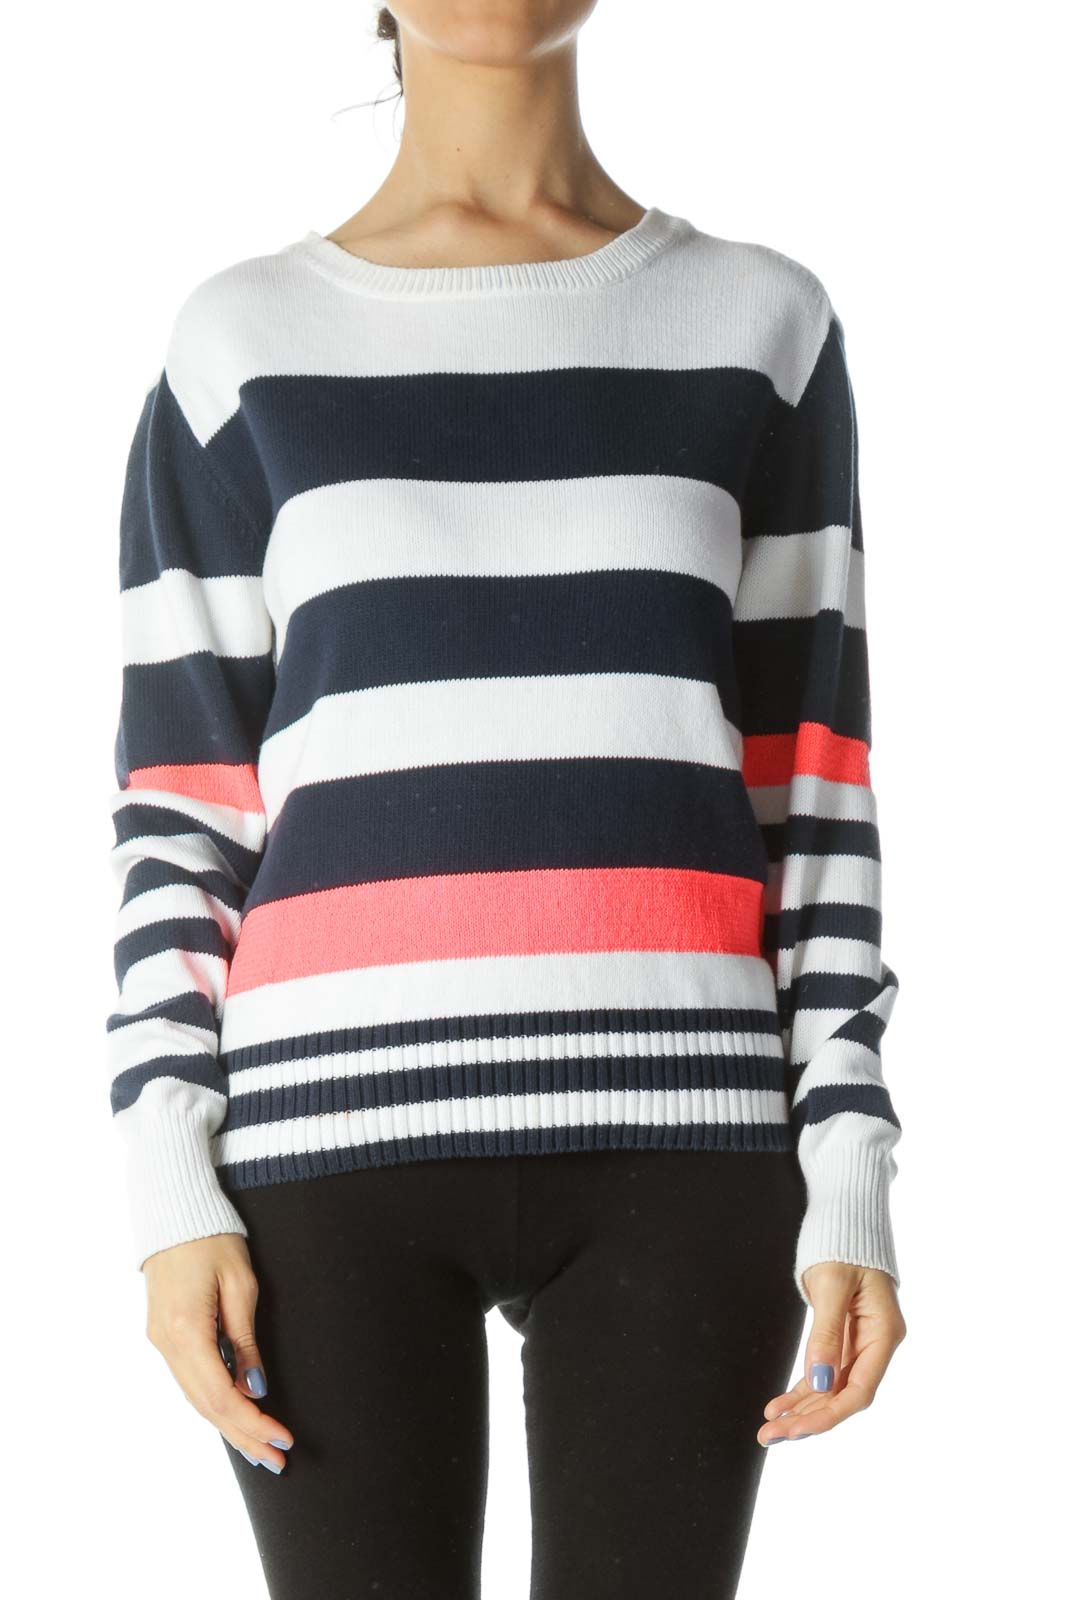 Blue/White/Neon-Pink Striped Long-Sleeve Sweater Front